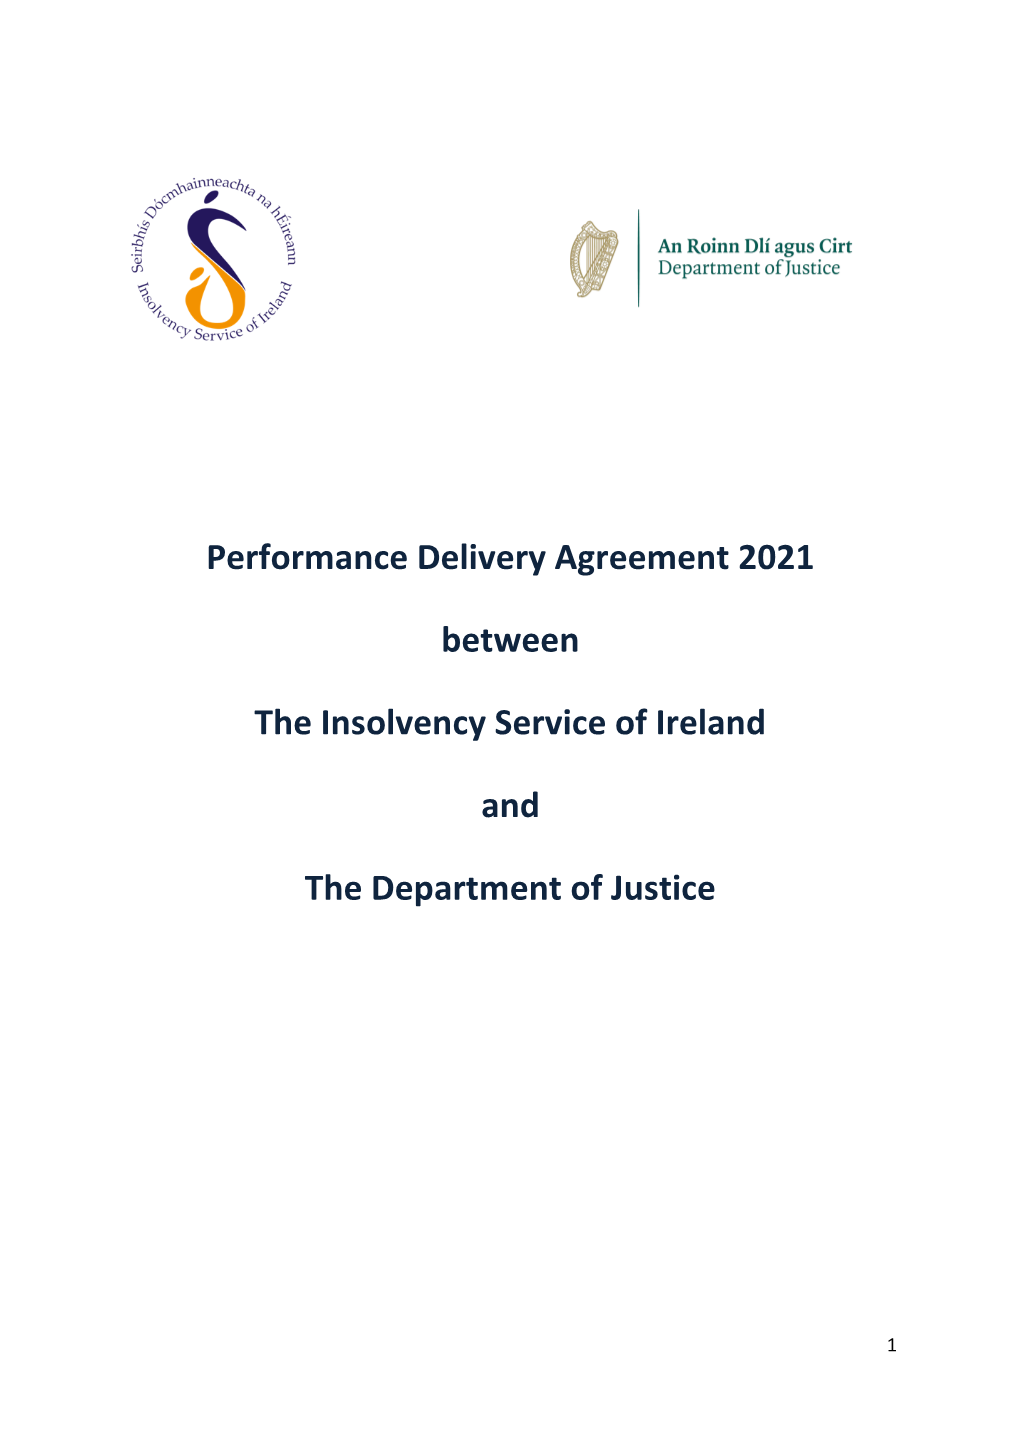 Performance Delivery Agreement 2021 Between the Insolvency